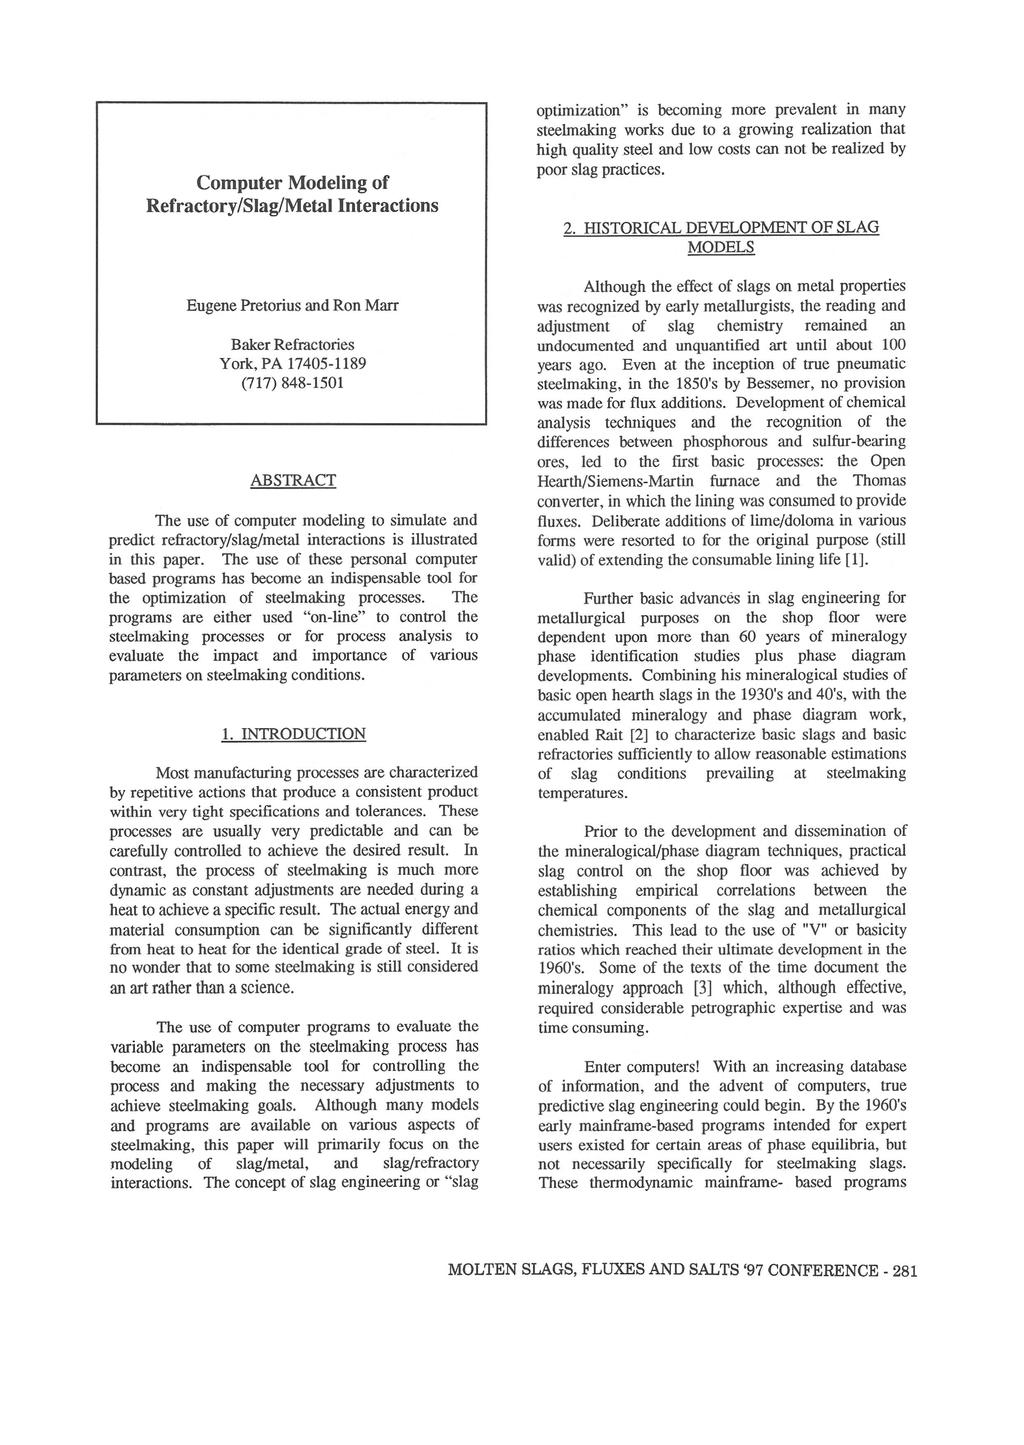 Computer Modeling of Refractory/Slag/Metal Interactions Eugene Pretorius and Ron Marr Baker Refractories York, PA 17405-1189 (717) 848-1501 ABS1RACT The use of computer modeling to simulate and